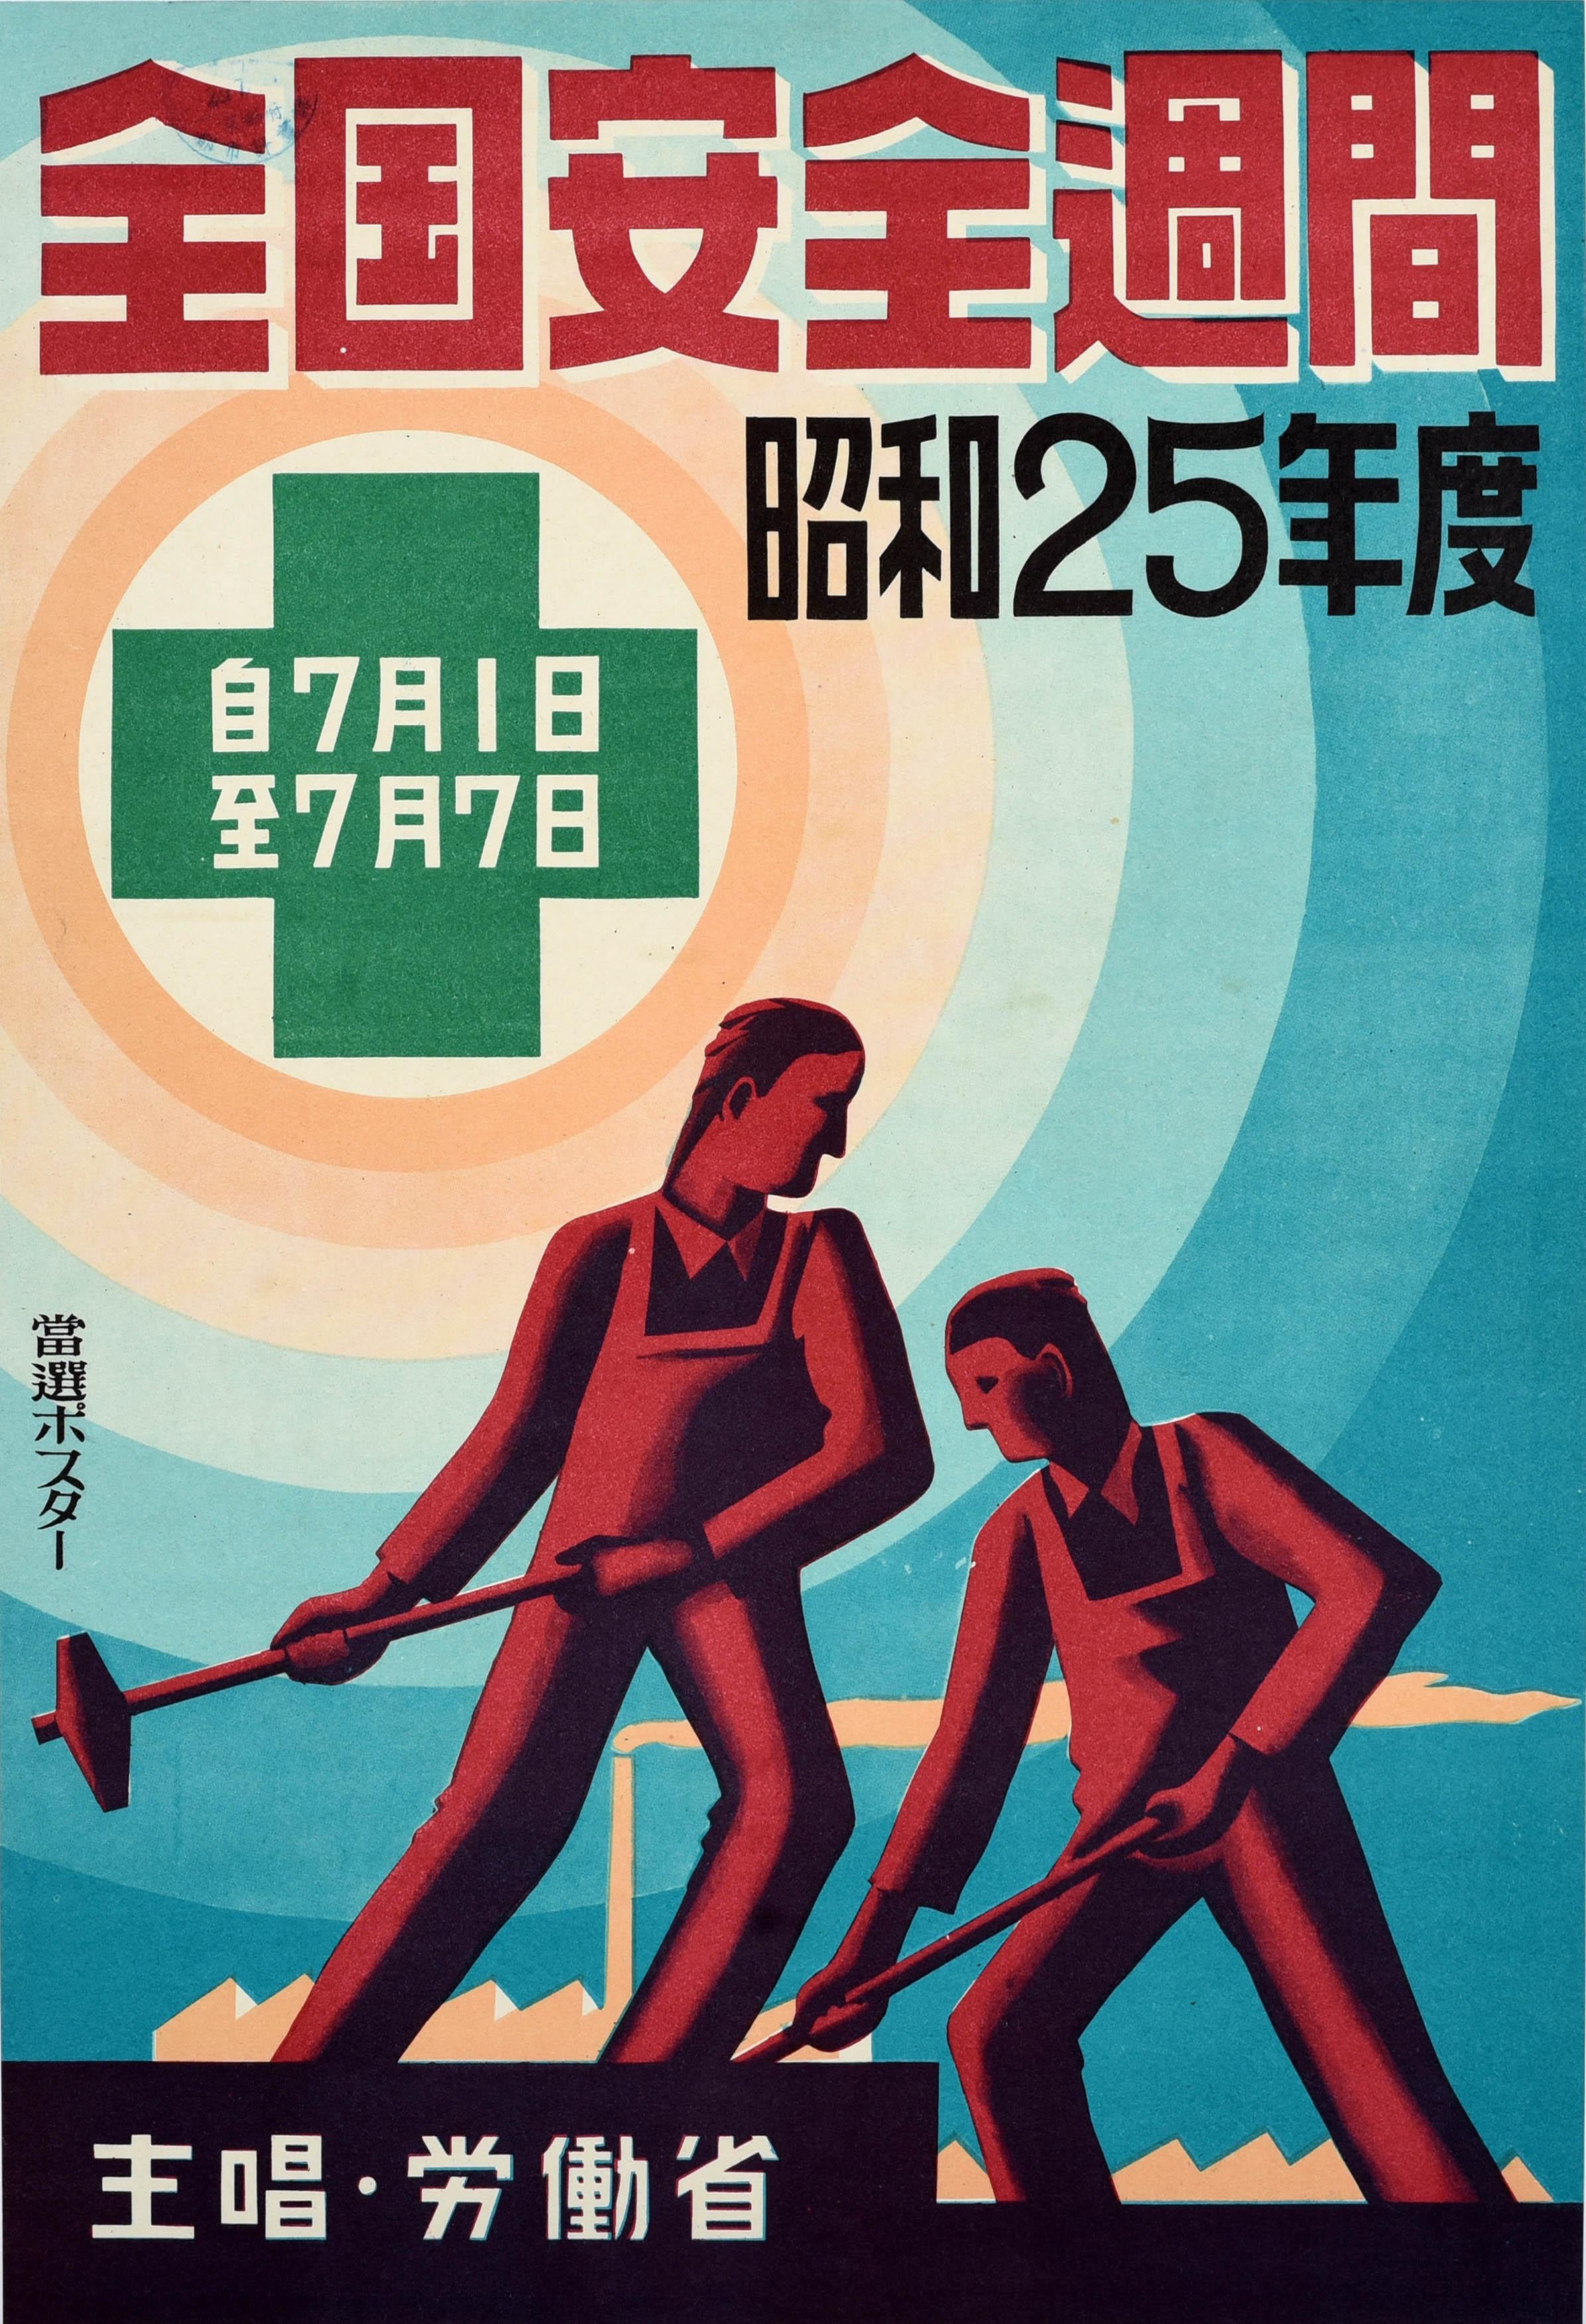 Unknown Print - Original Vintage Health And Safety Propaganda Poster National Safety Week Japan